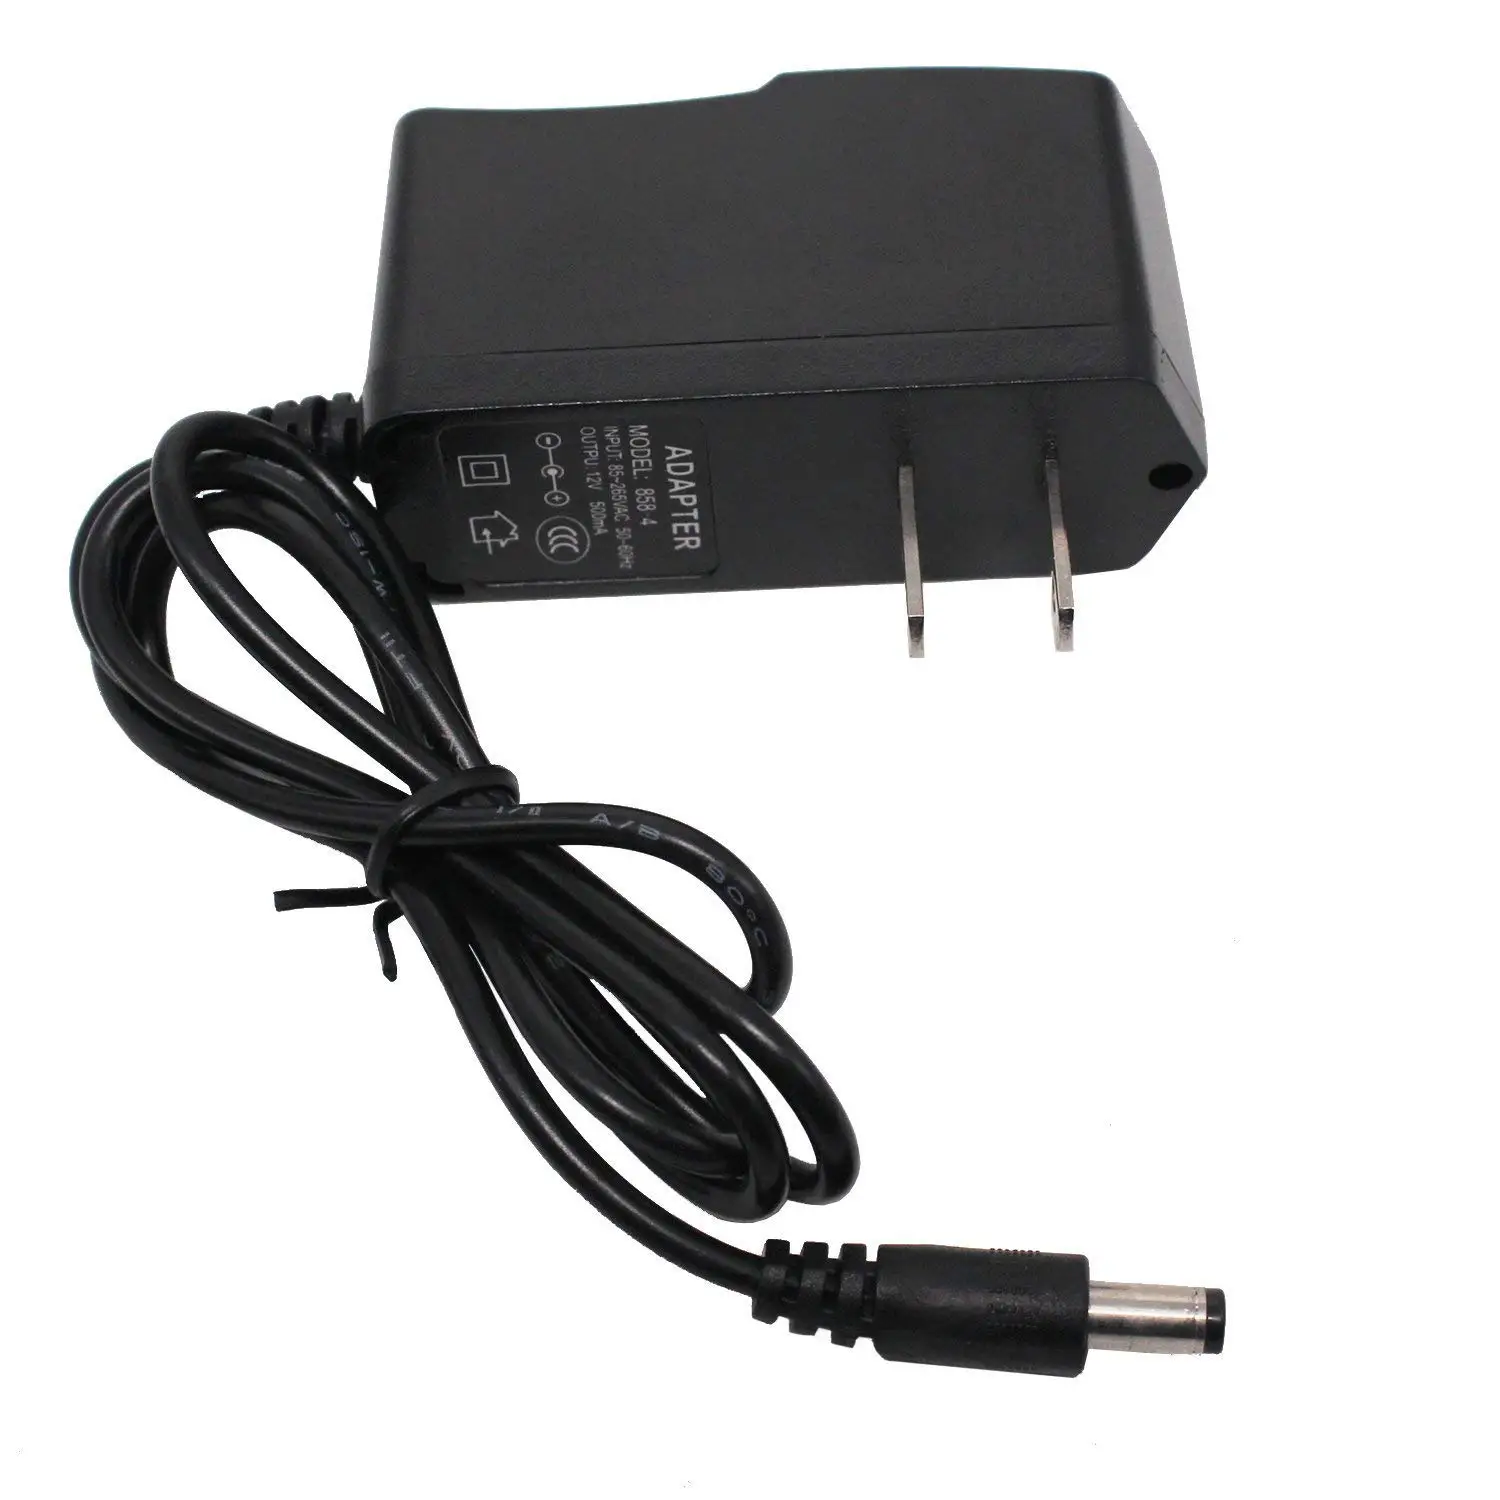 WPLN4232 Rapid Charger for Motorola XPR6550 XPR6300 XPR6350 XPR7350 XPR7550e 